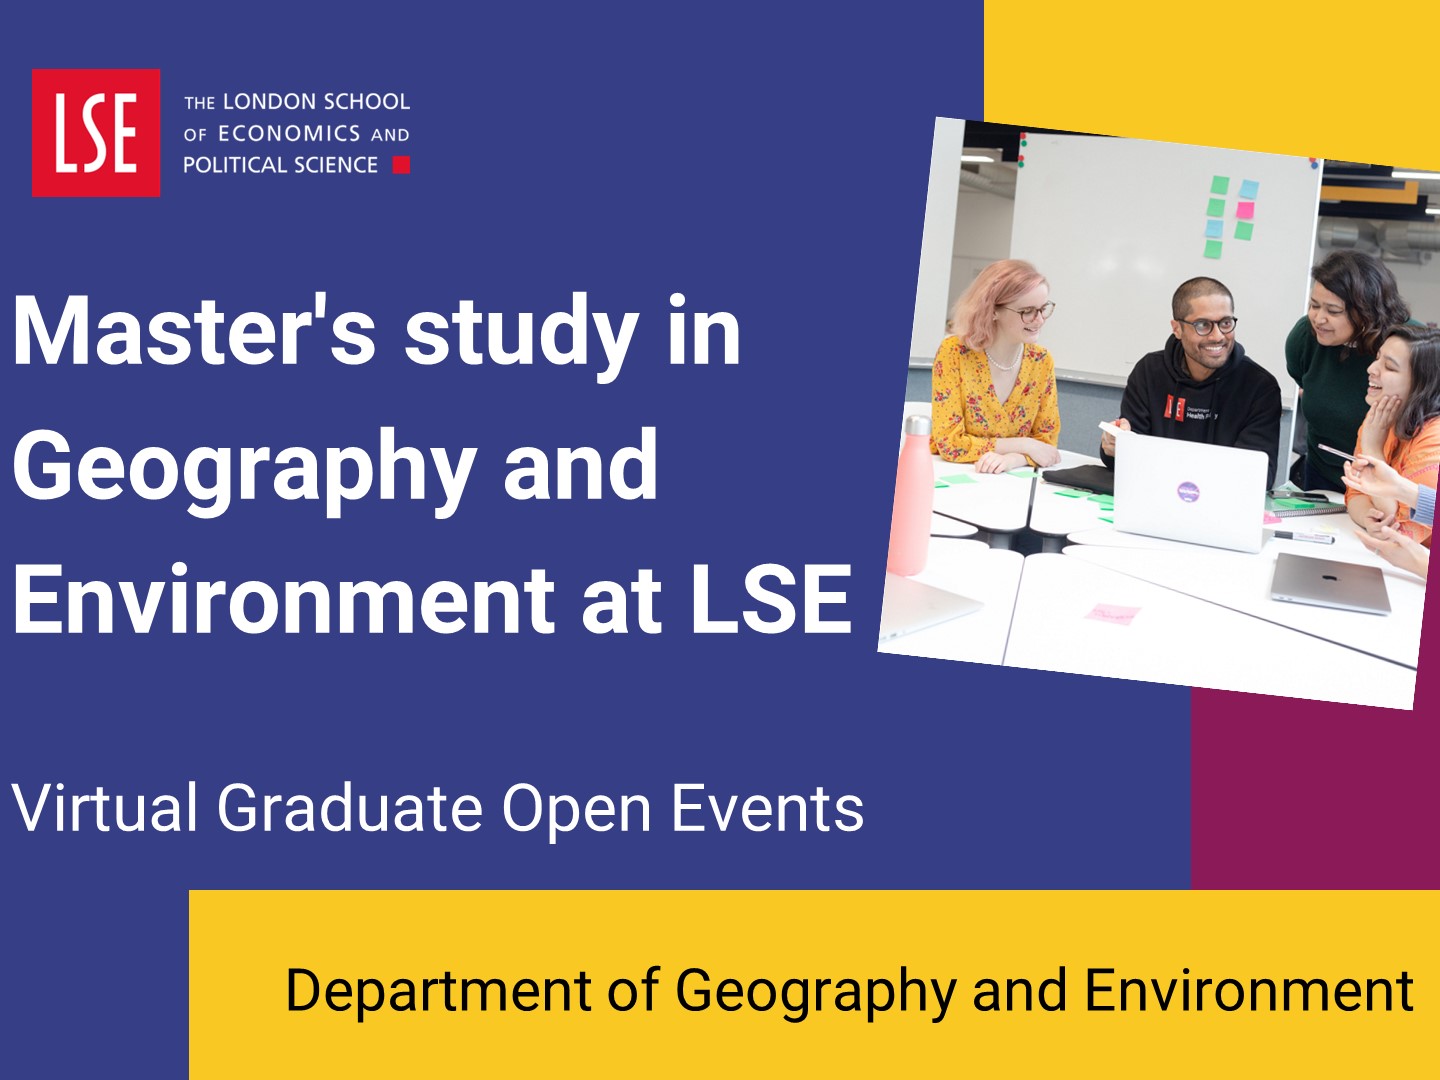 Introduction to MSc in Geography and Environment